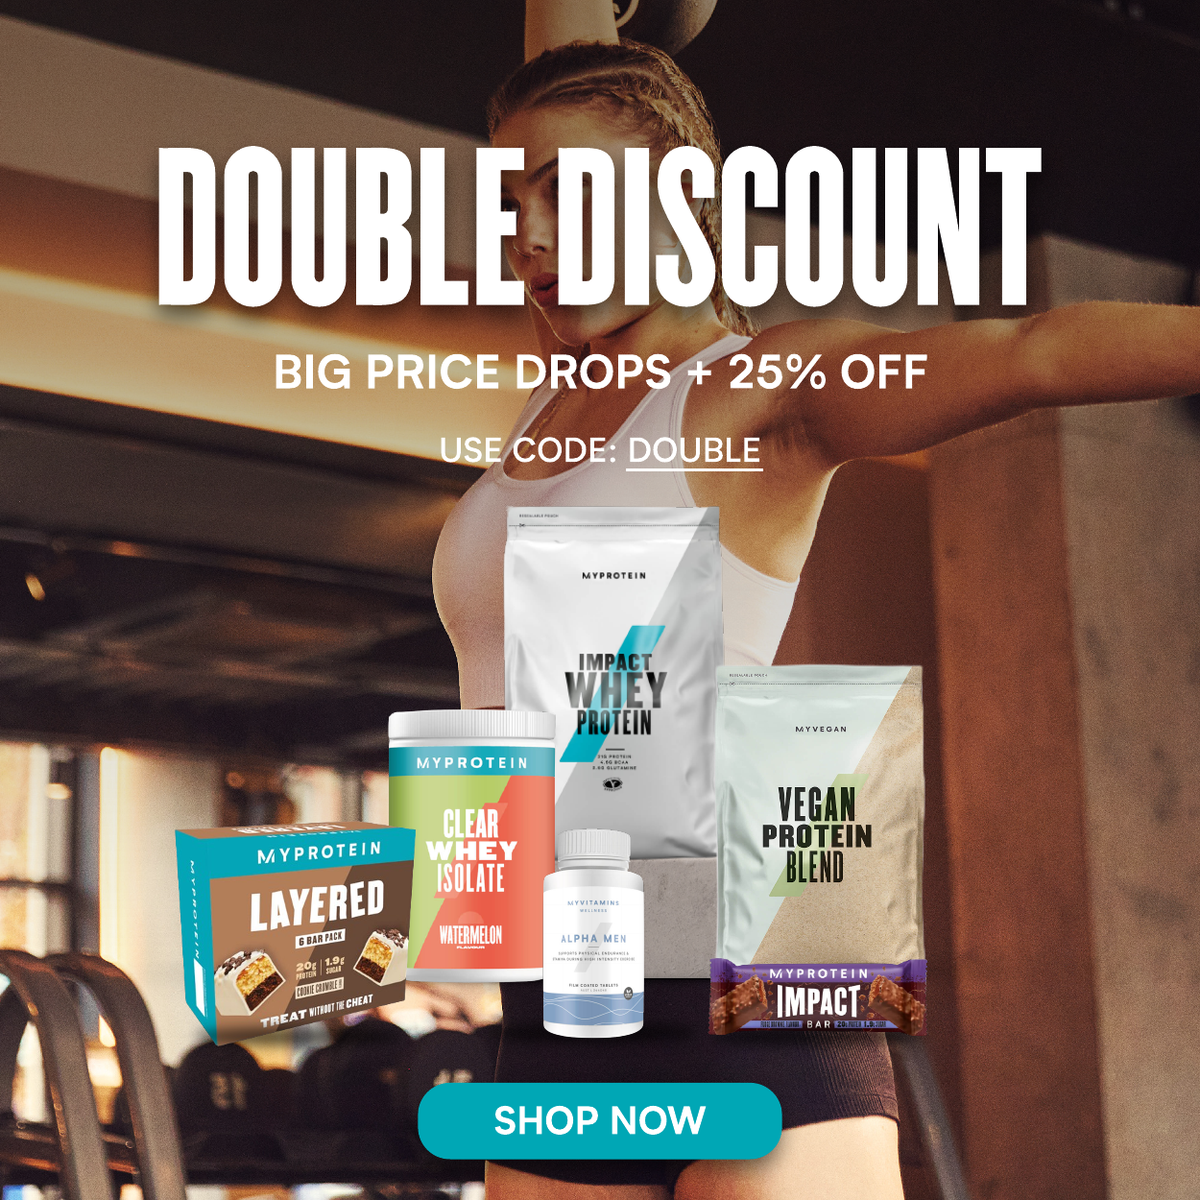 Double Discount | Big Price Drops + 25% Off Use Code: DOUBLE